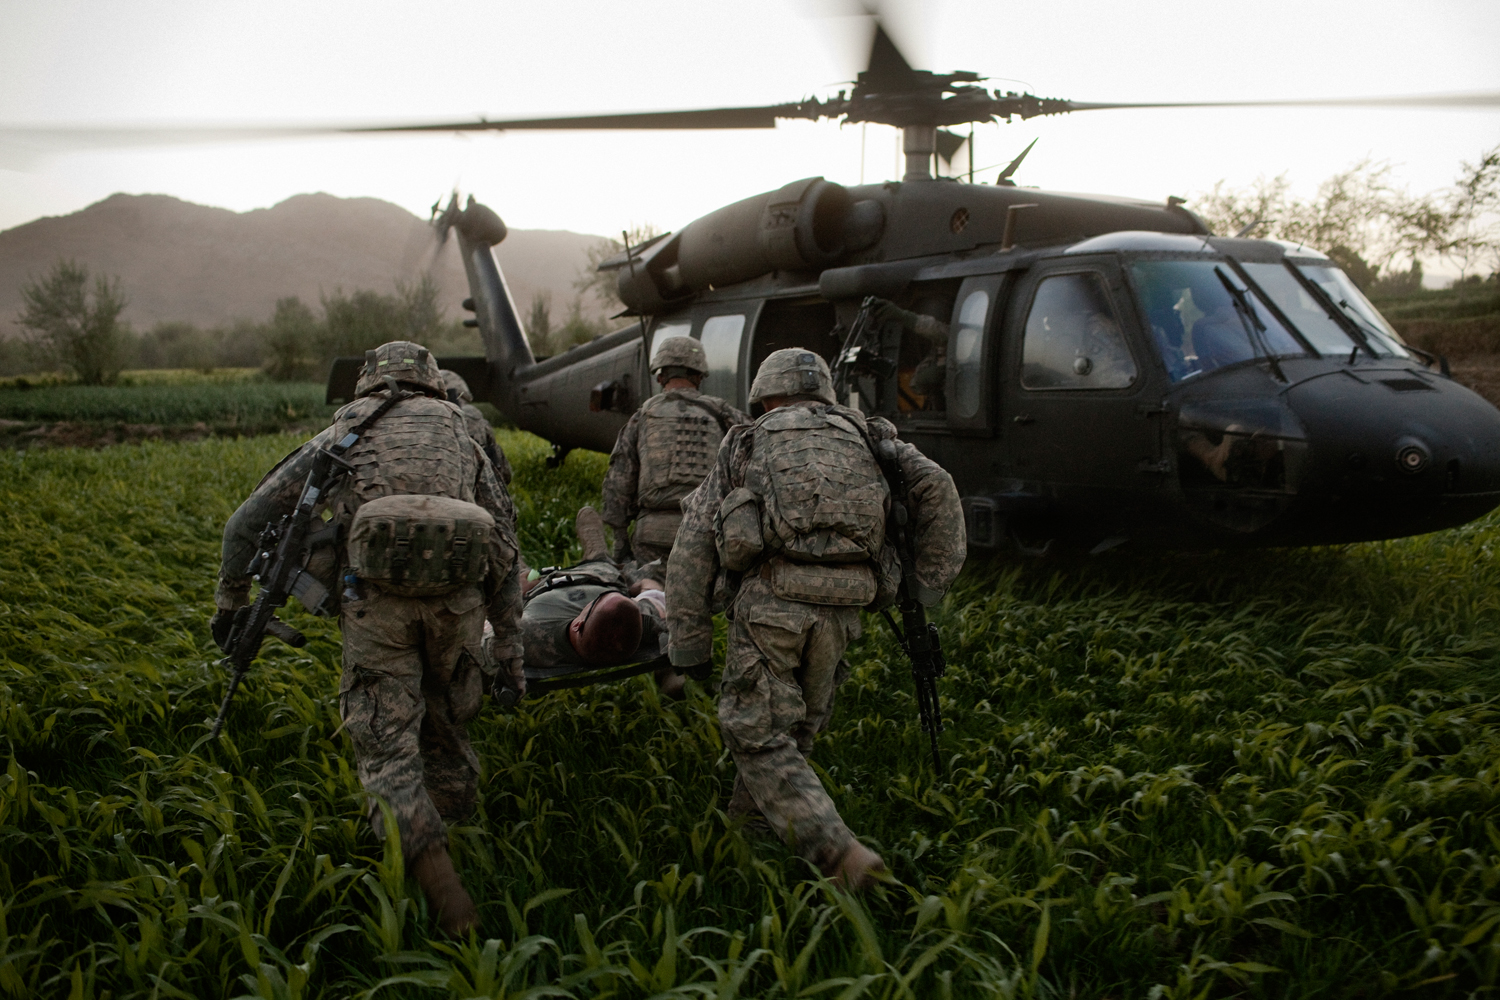  Sergeant Chet Millard is carried on a stretcher to a medical evacuation helicopter after he was injured in an improvised explosive device attack on his vehicle in the Tangi Valley, Wardak Province,&nbsp;Afghanistan. 